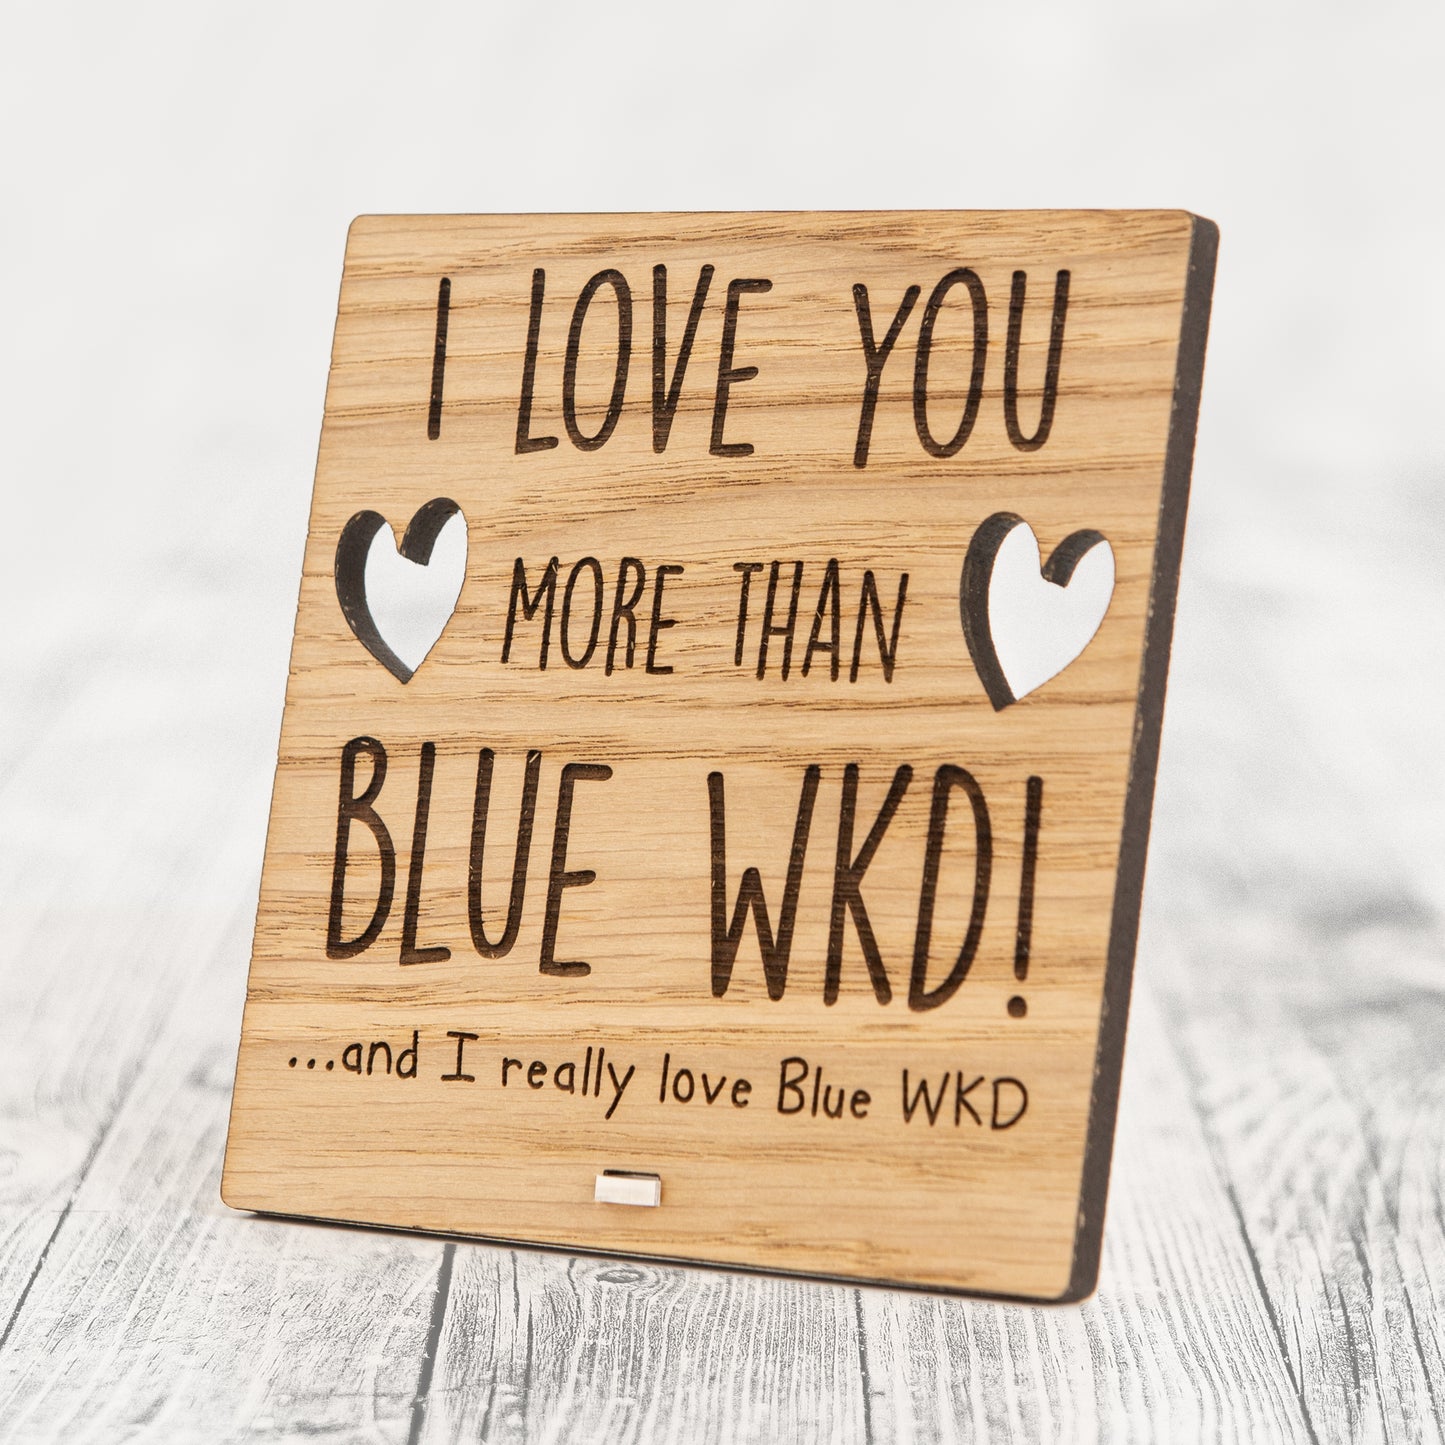 I Love You More Than BLUE WKD - Wooden Valentine's Day Plaque